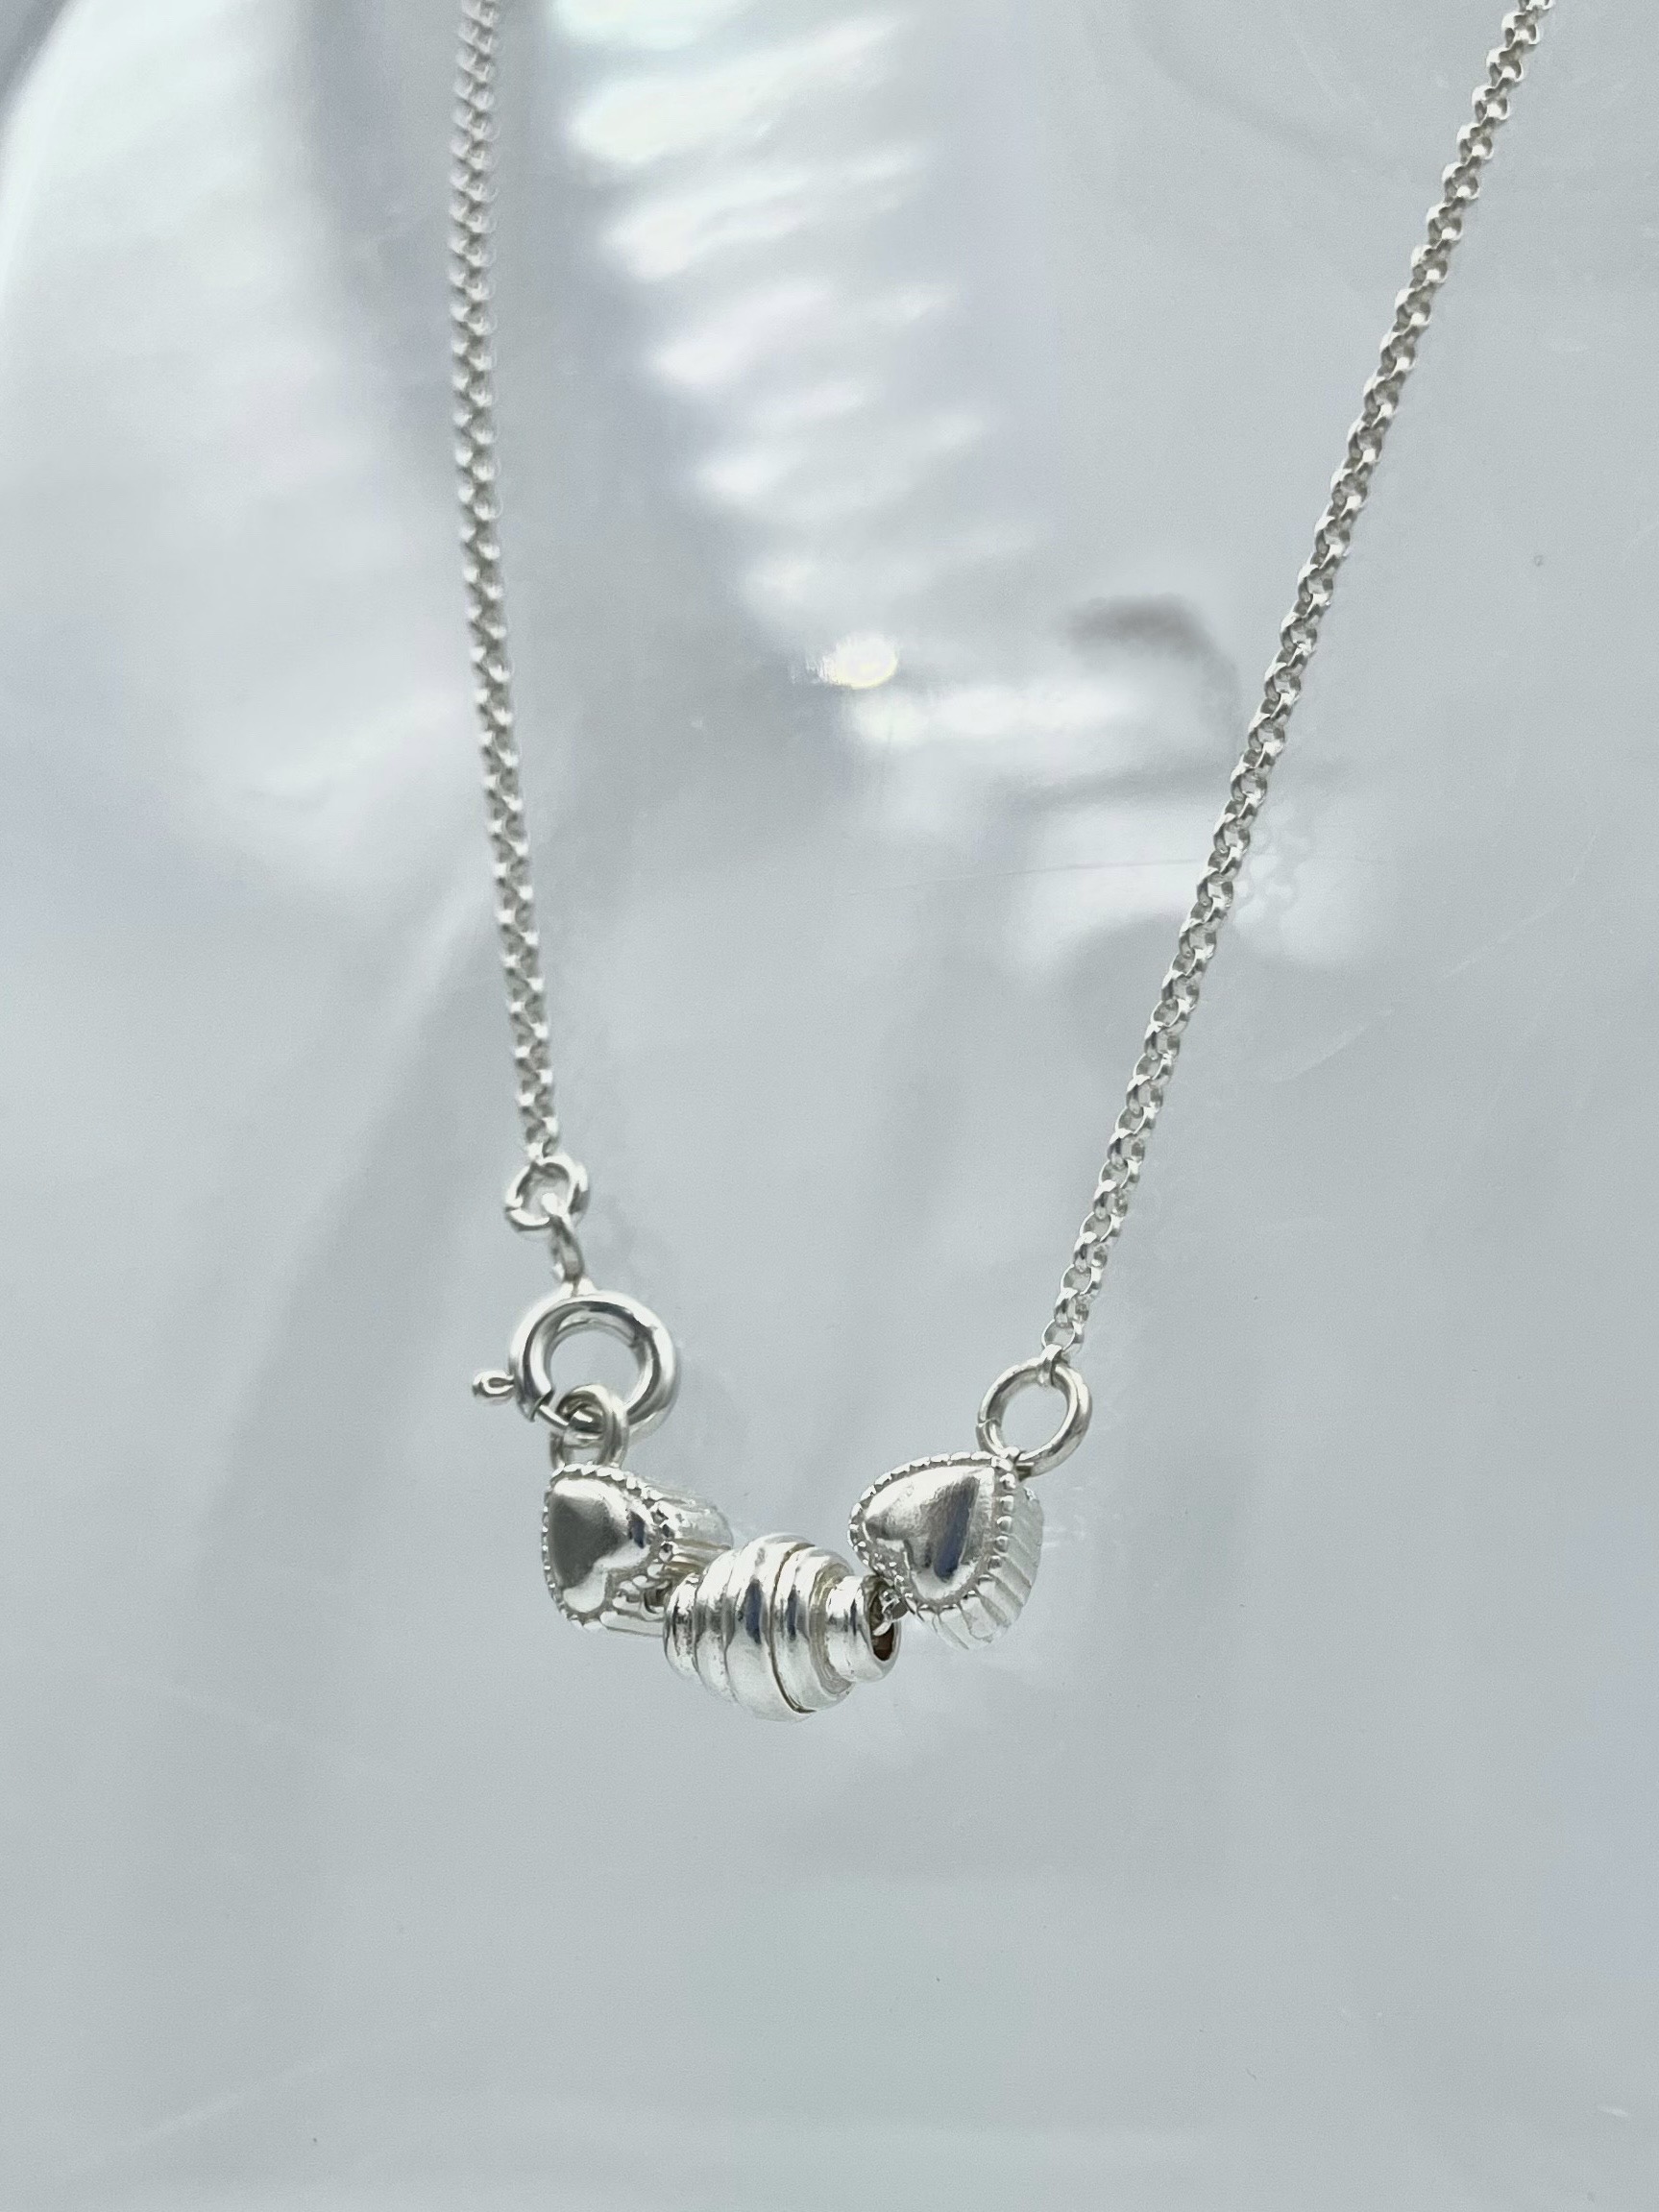 Heart Silver Beads Necklace